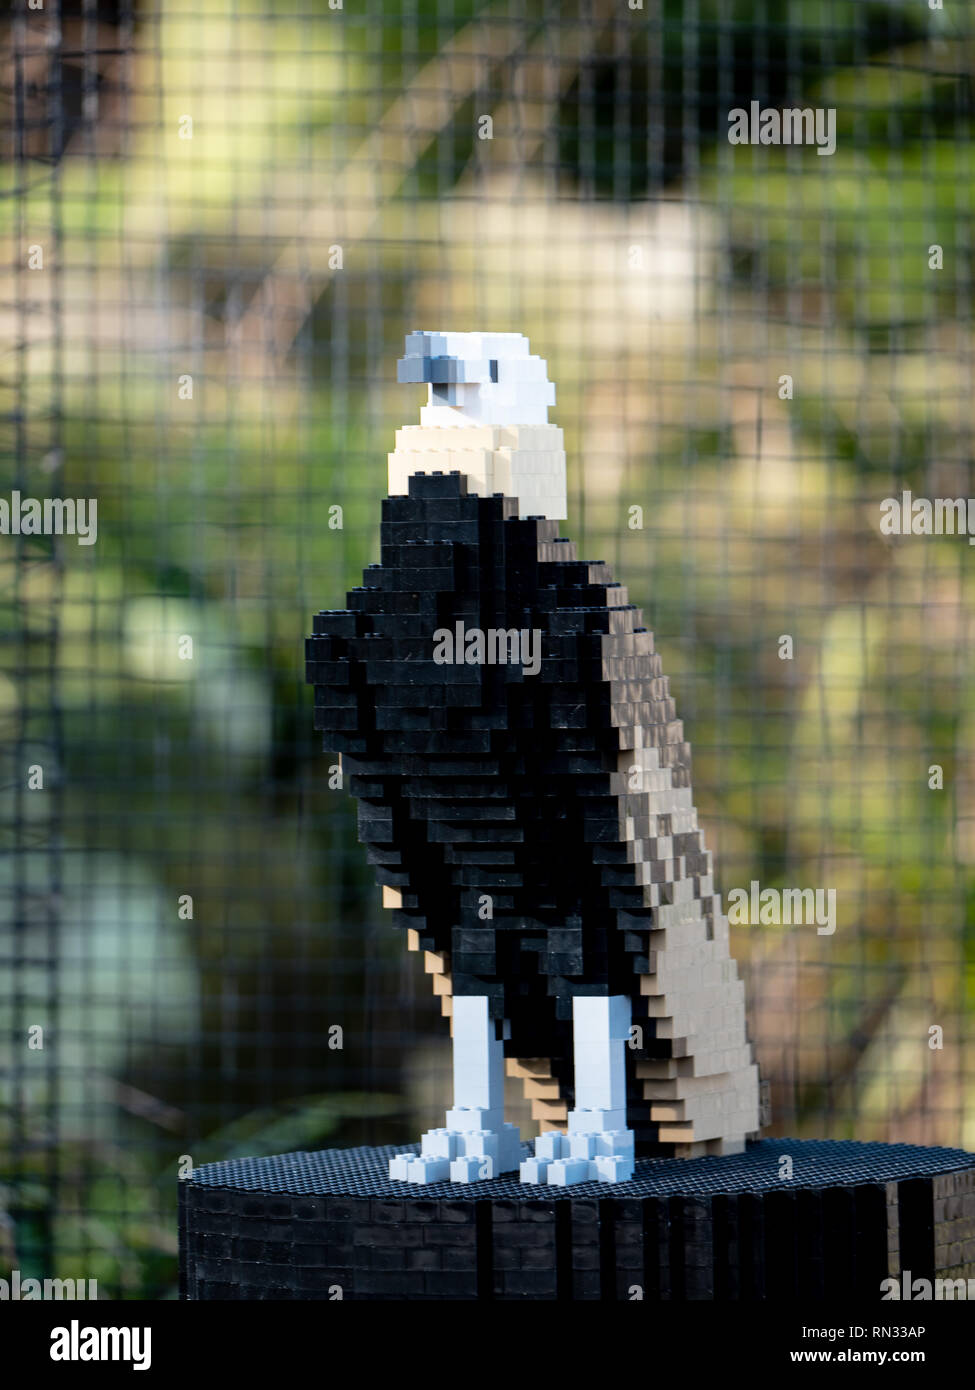 Eurasian Vulture model, part of the Lego Brick Trail at Chester Zoo Stock Photo